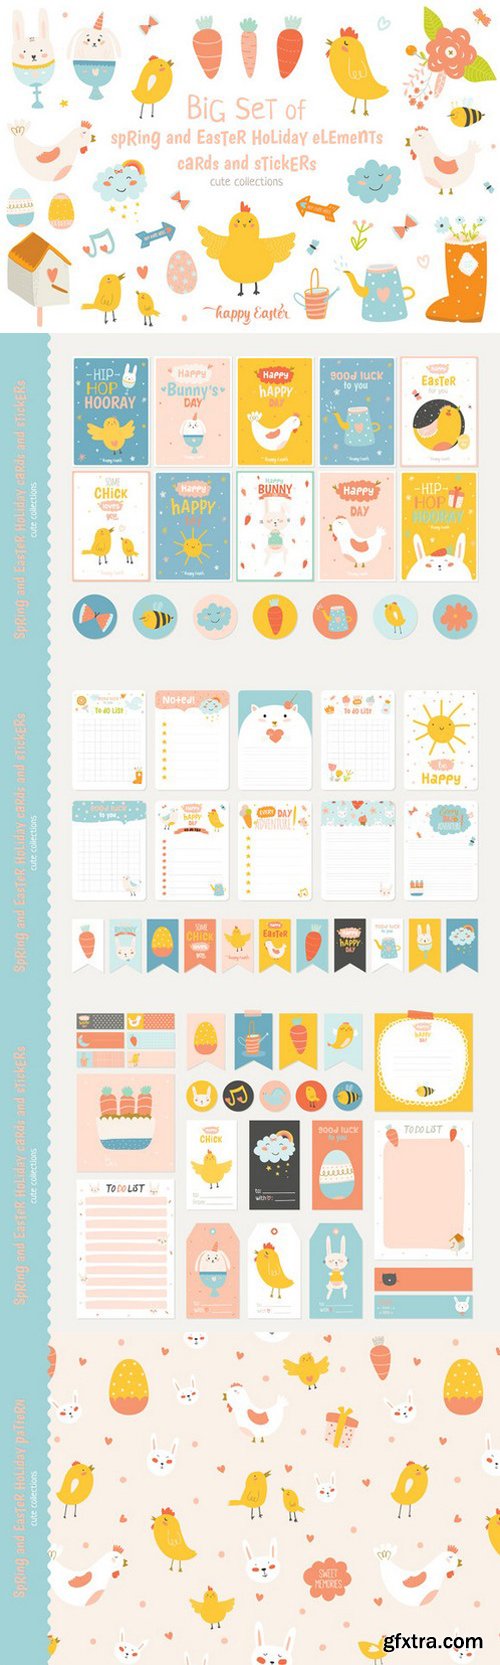 CM - Cute Spring and Easter holiday set 565634